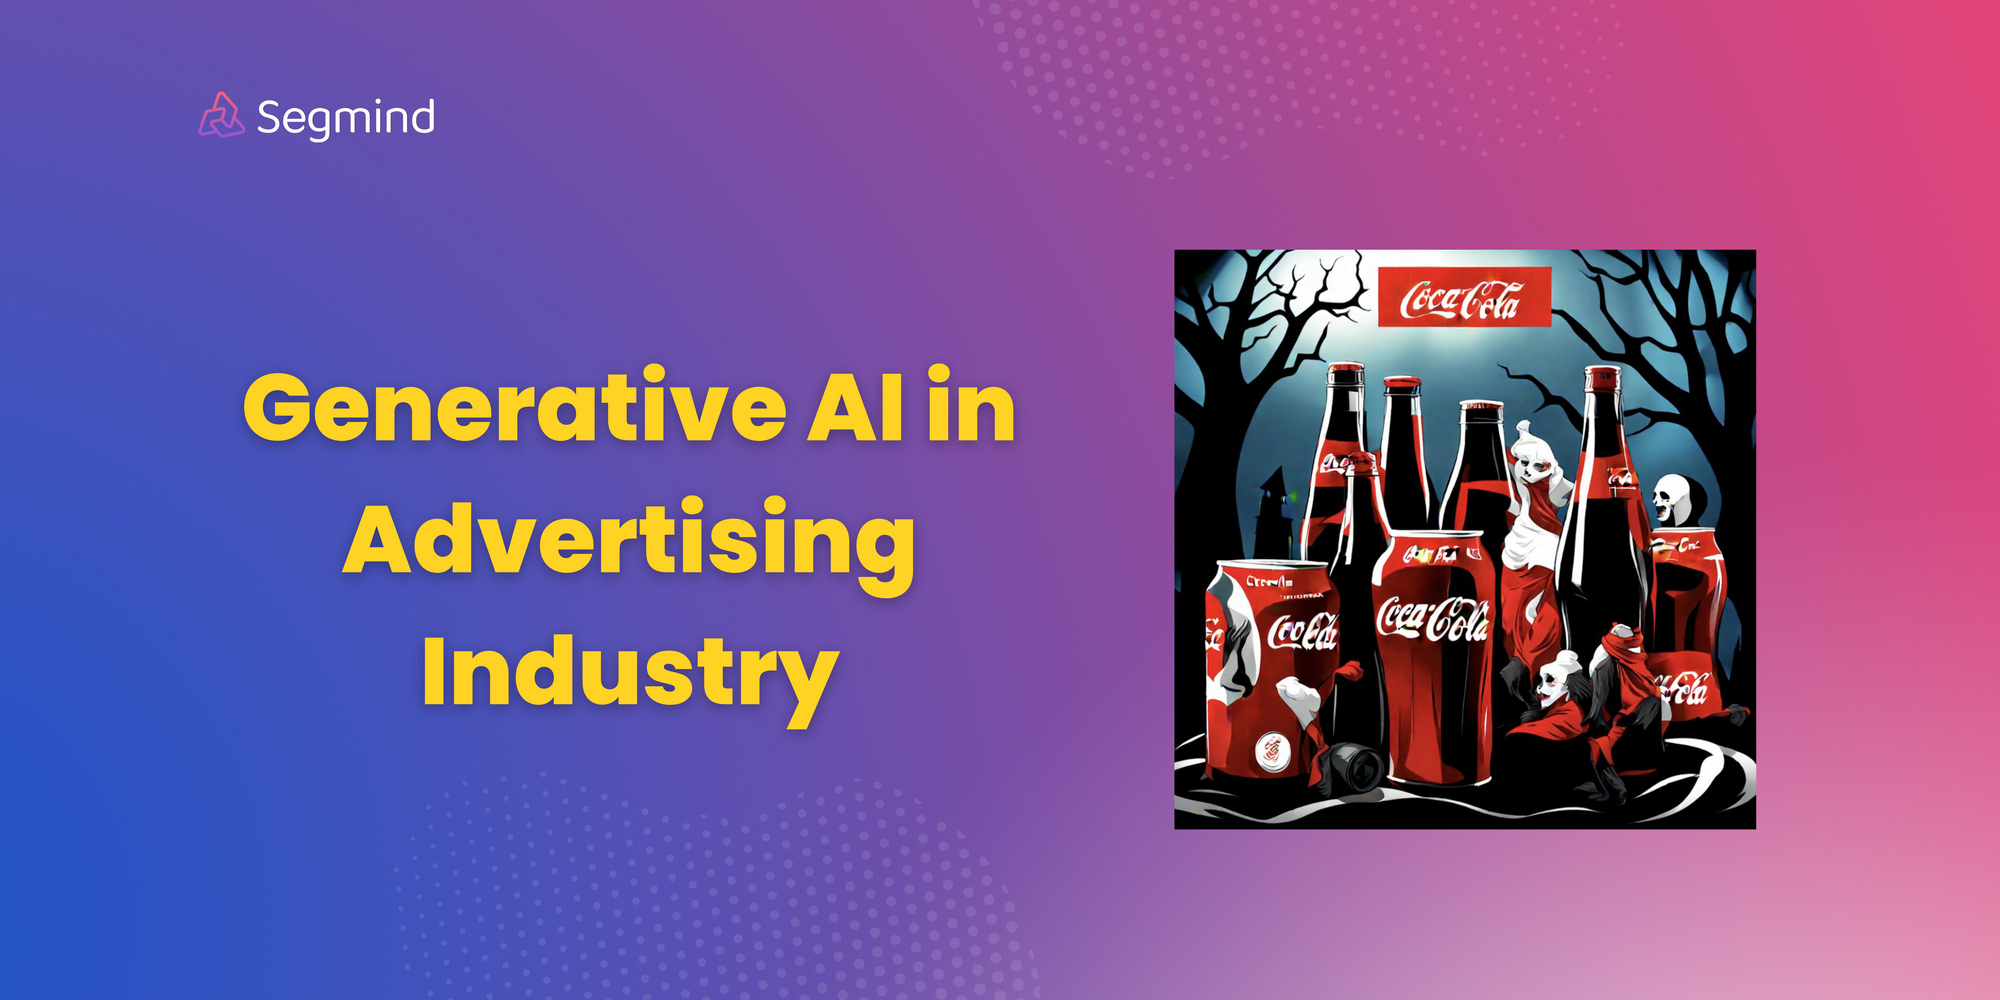 Generative AI: A Game Changer for the Advertising Industry